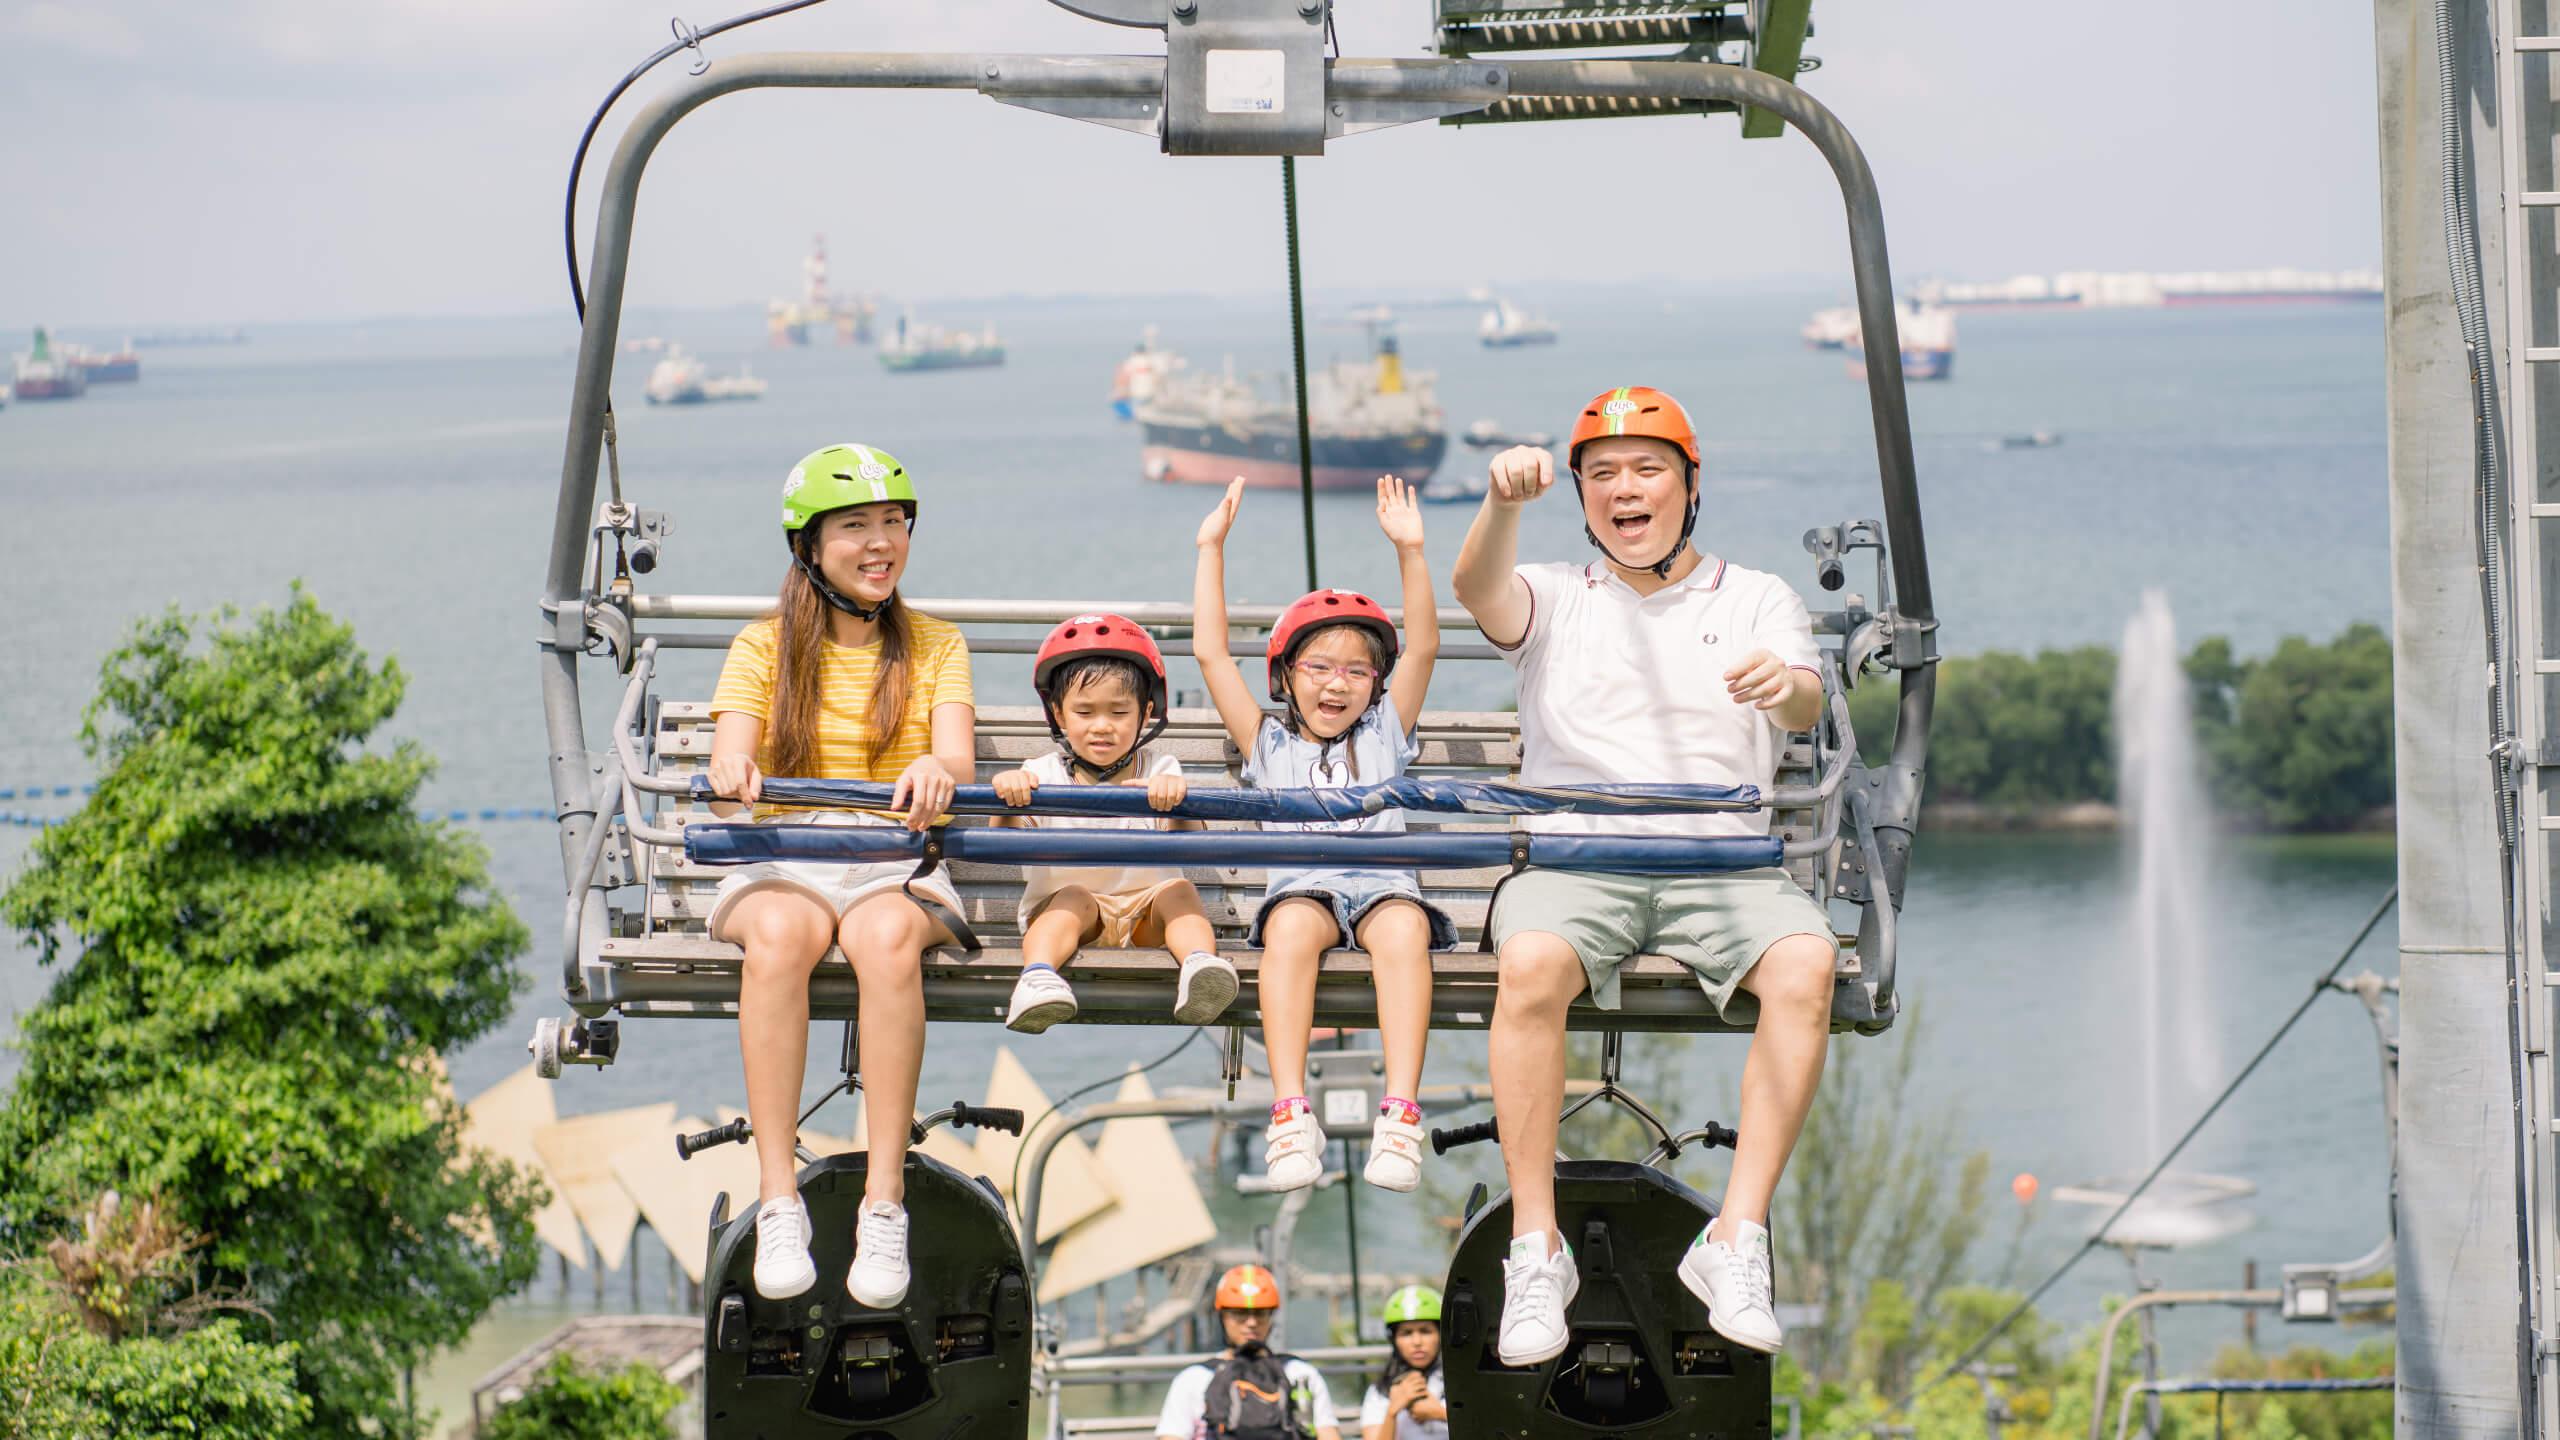 A family with two small kids rides the Skyride chairlift together.